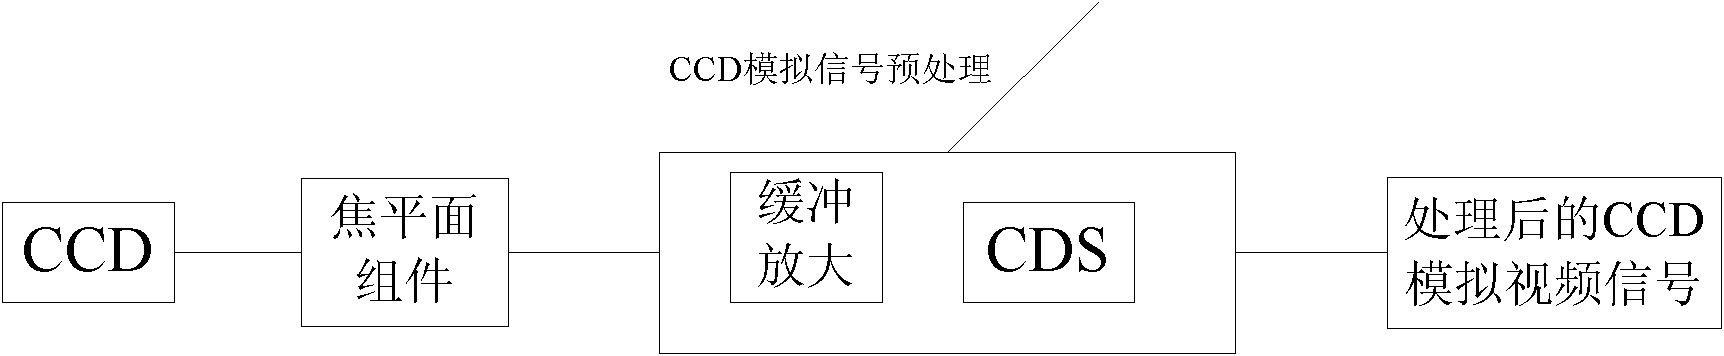 Method and system for realizing high-resolution analog-to-digital conversion by low-resolution ADC (Analog to Digital Converter)